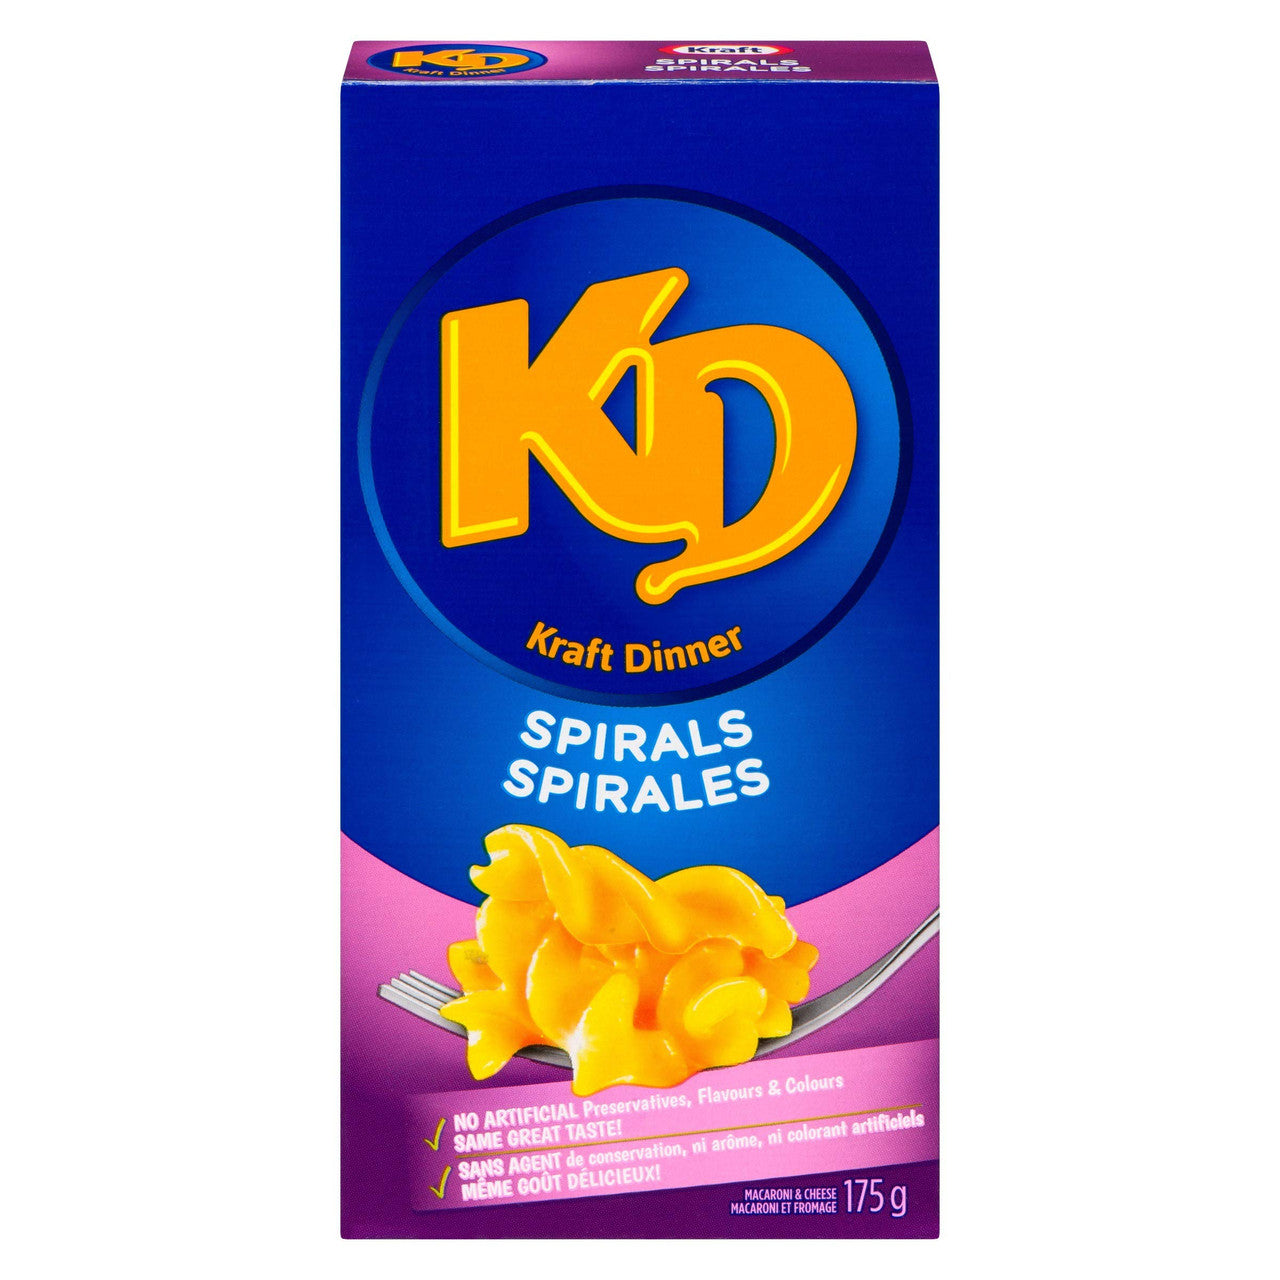 Kraft Dinner Spirals Macaroni & Cheese, 175g/6.2oz. (Pack of 24), {Imported from Canada}